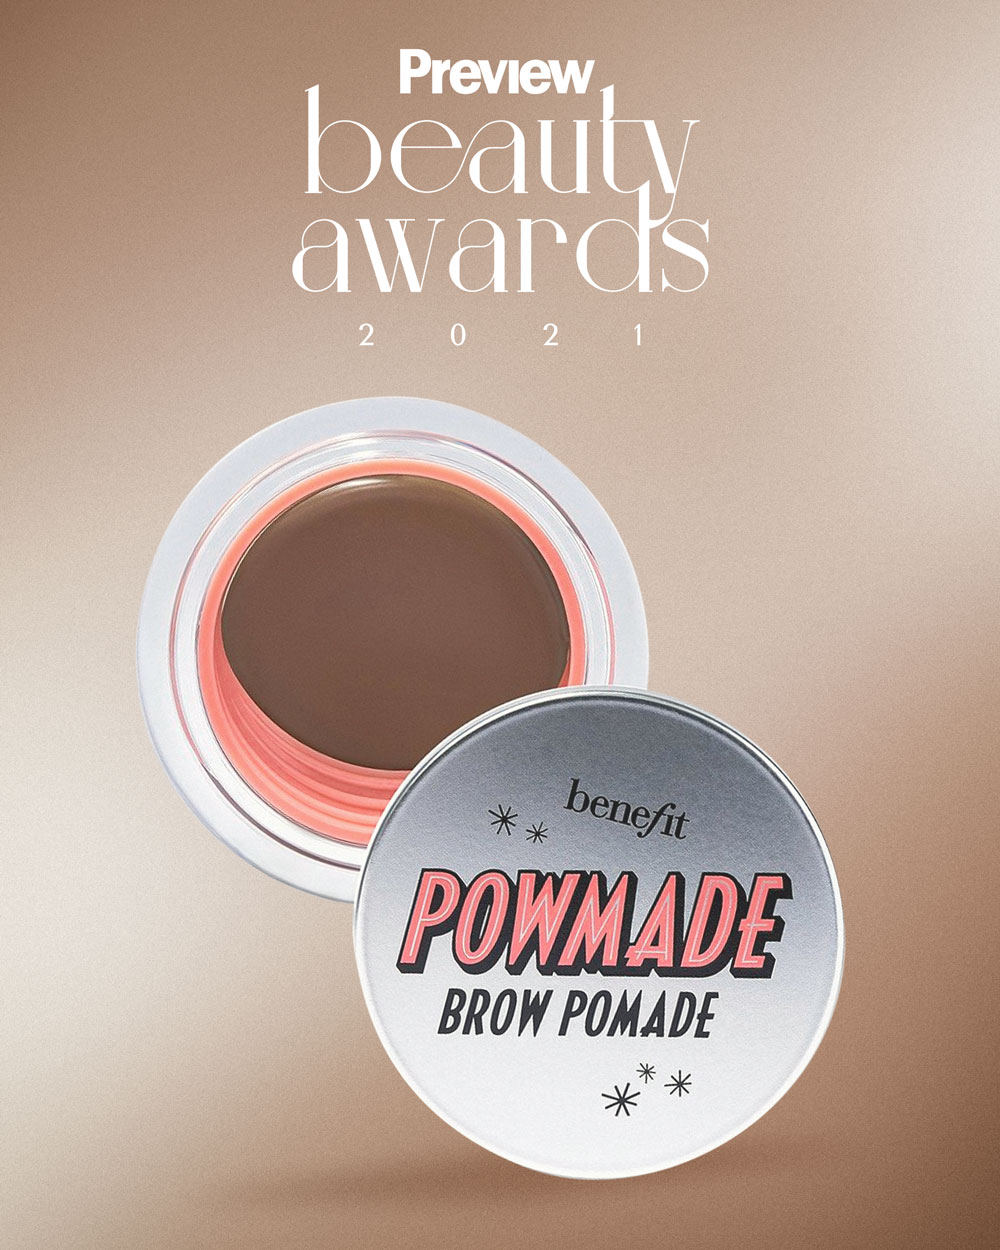 preview beauty awards 2021 winners